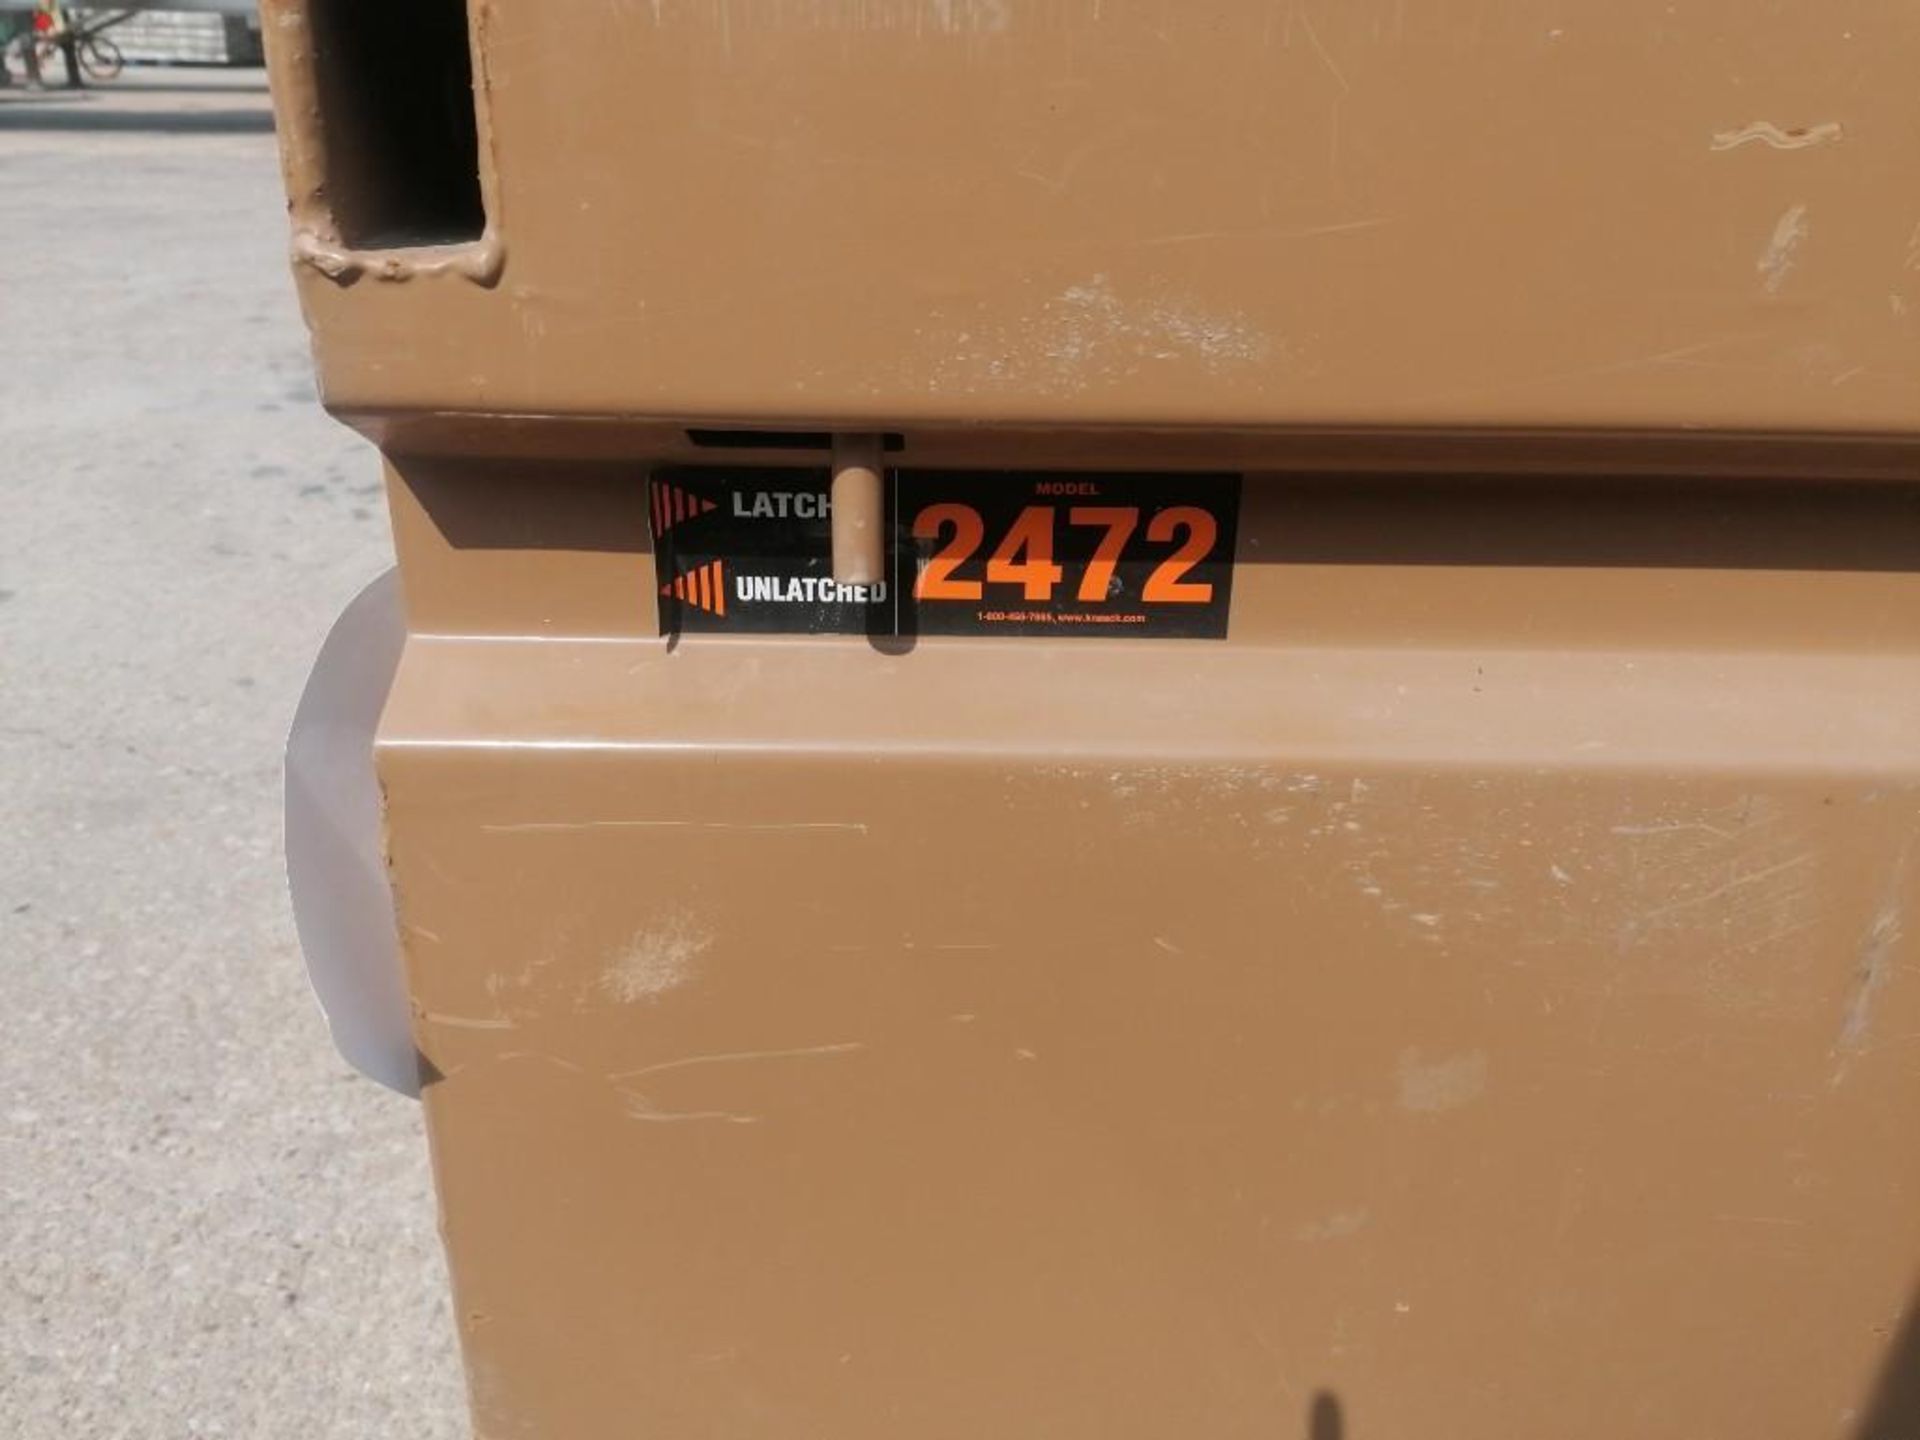 KNAACK Job Box Model 2472 with (50) Turnbuckles. Located at 301 E Henry Street, Mt. Pleasant, IA - Image 2 of 4